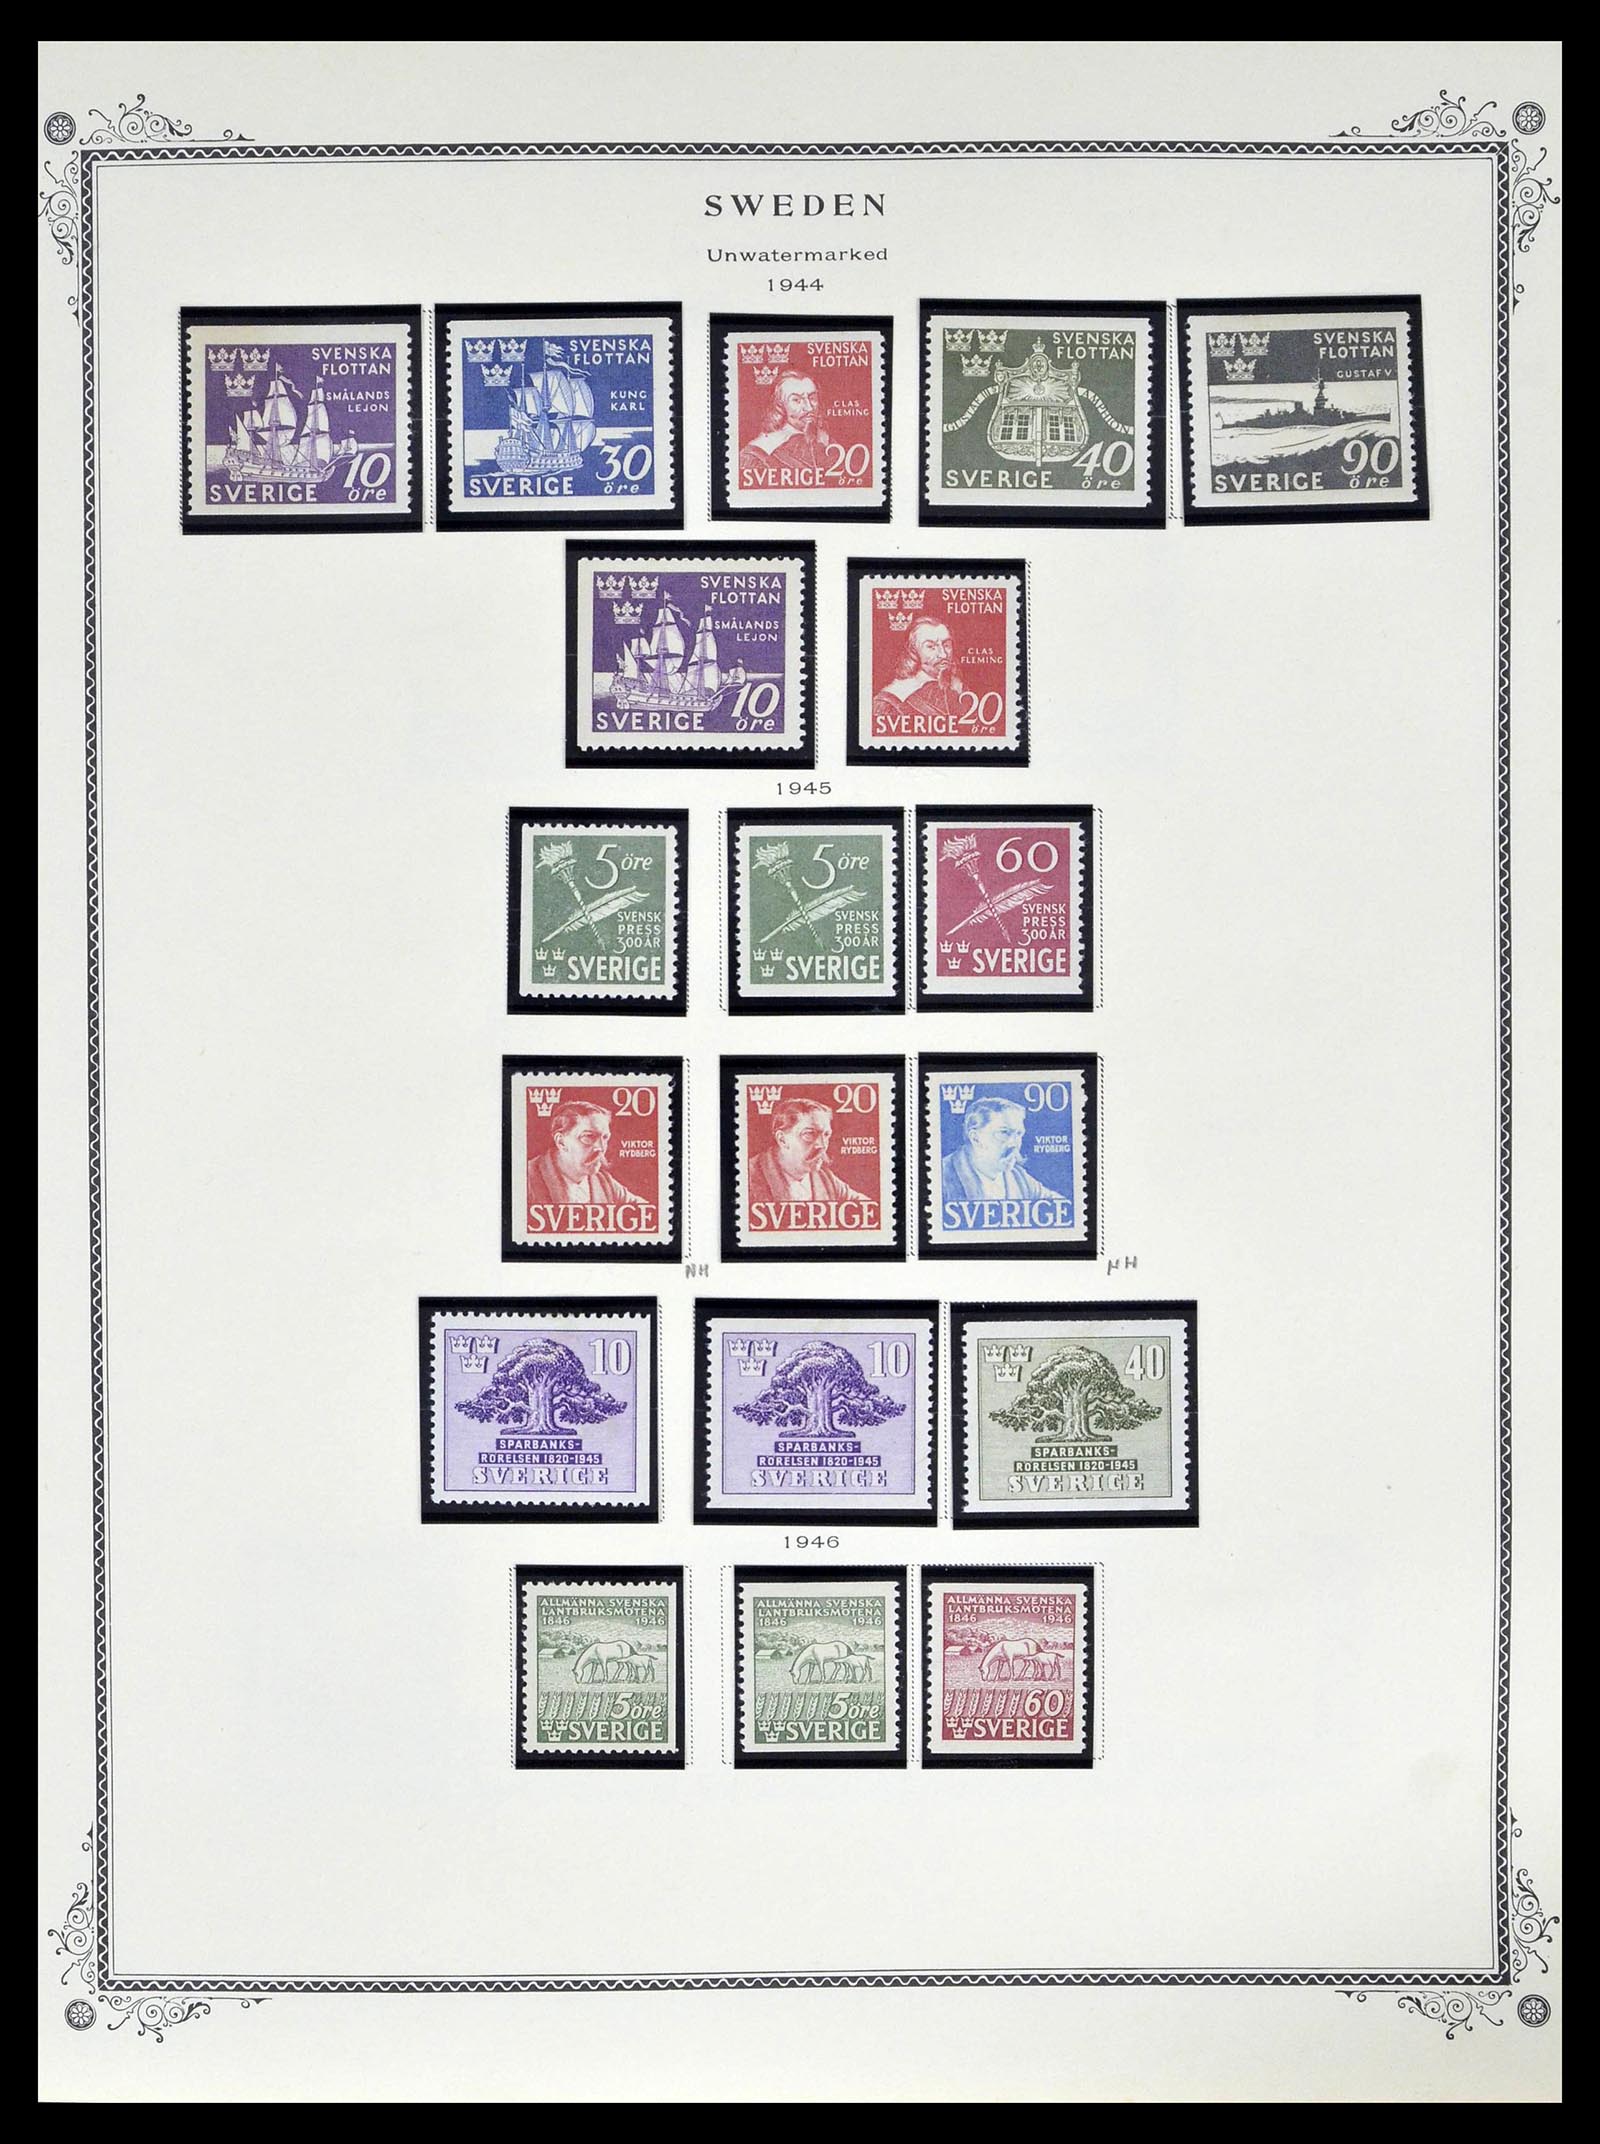 39179 0033 - Stamp collection 39179 Sweden 1855-1997.